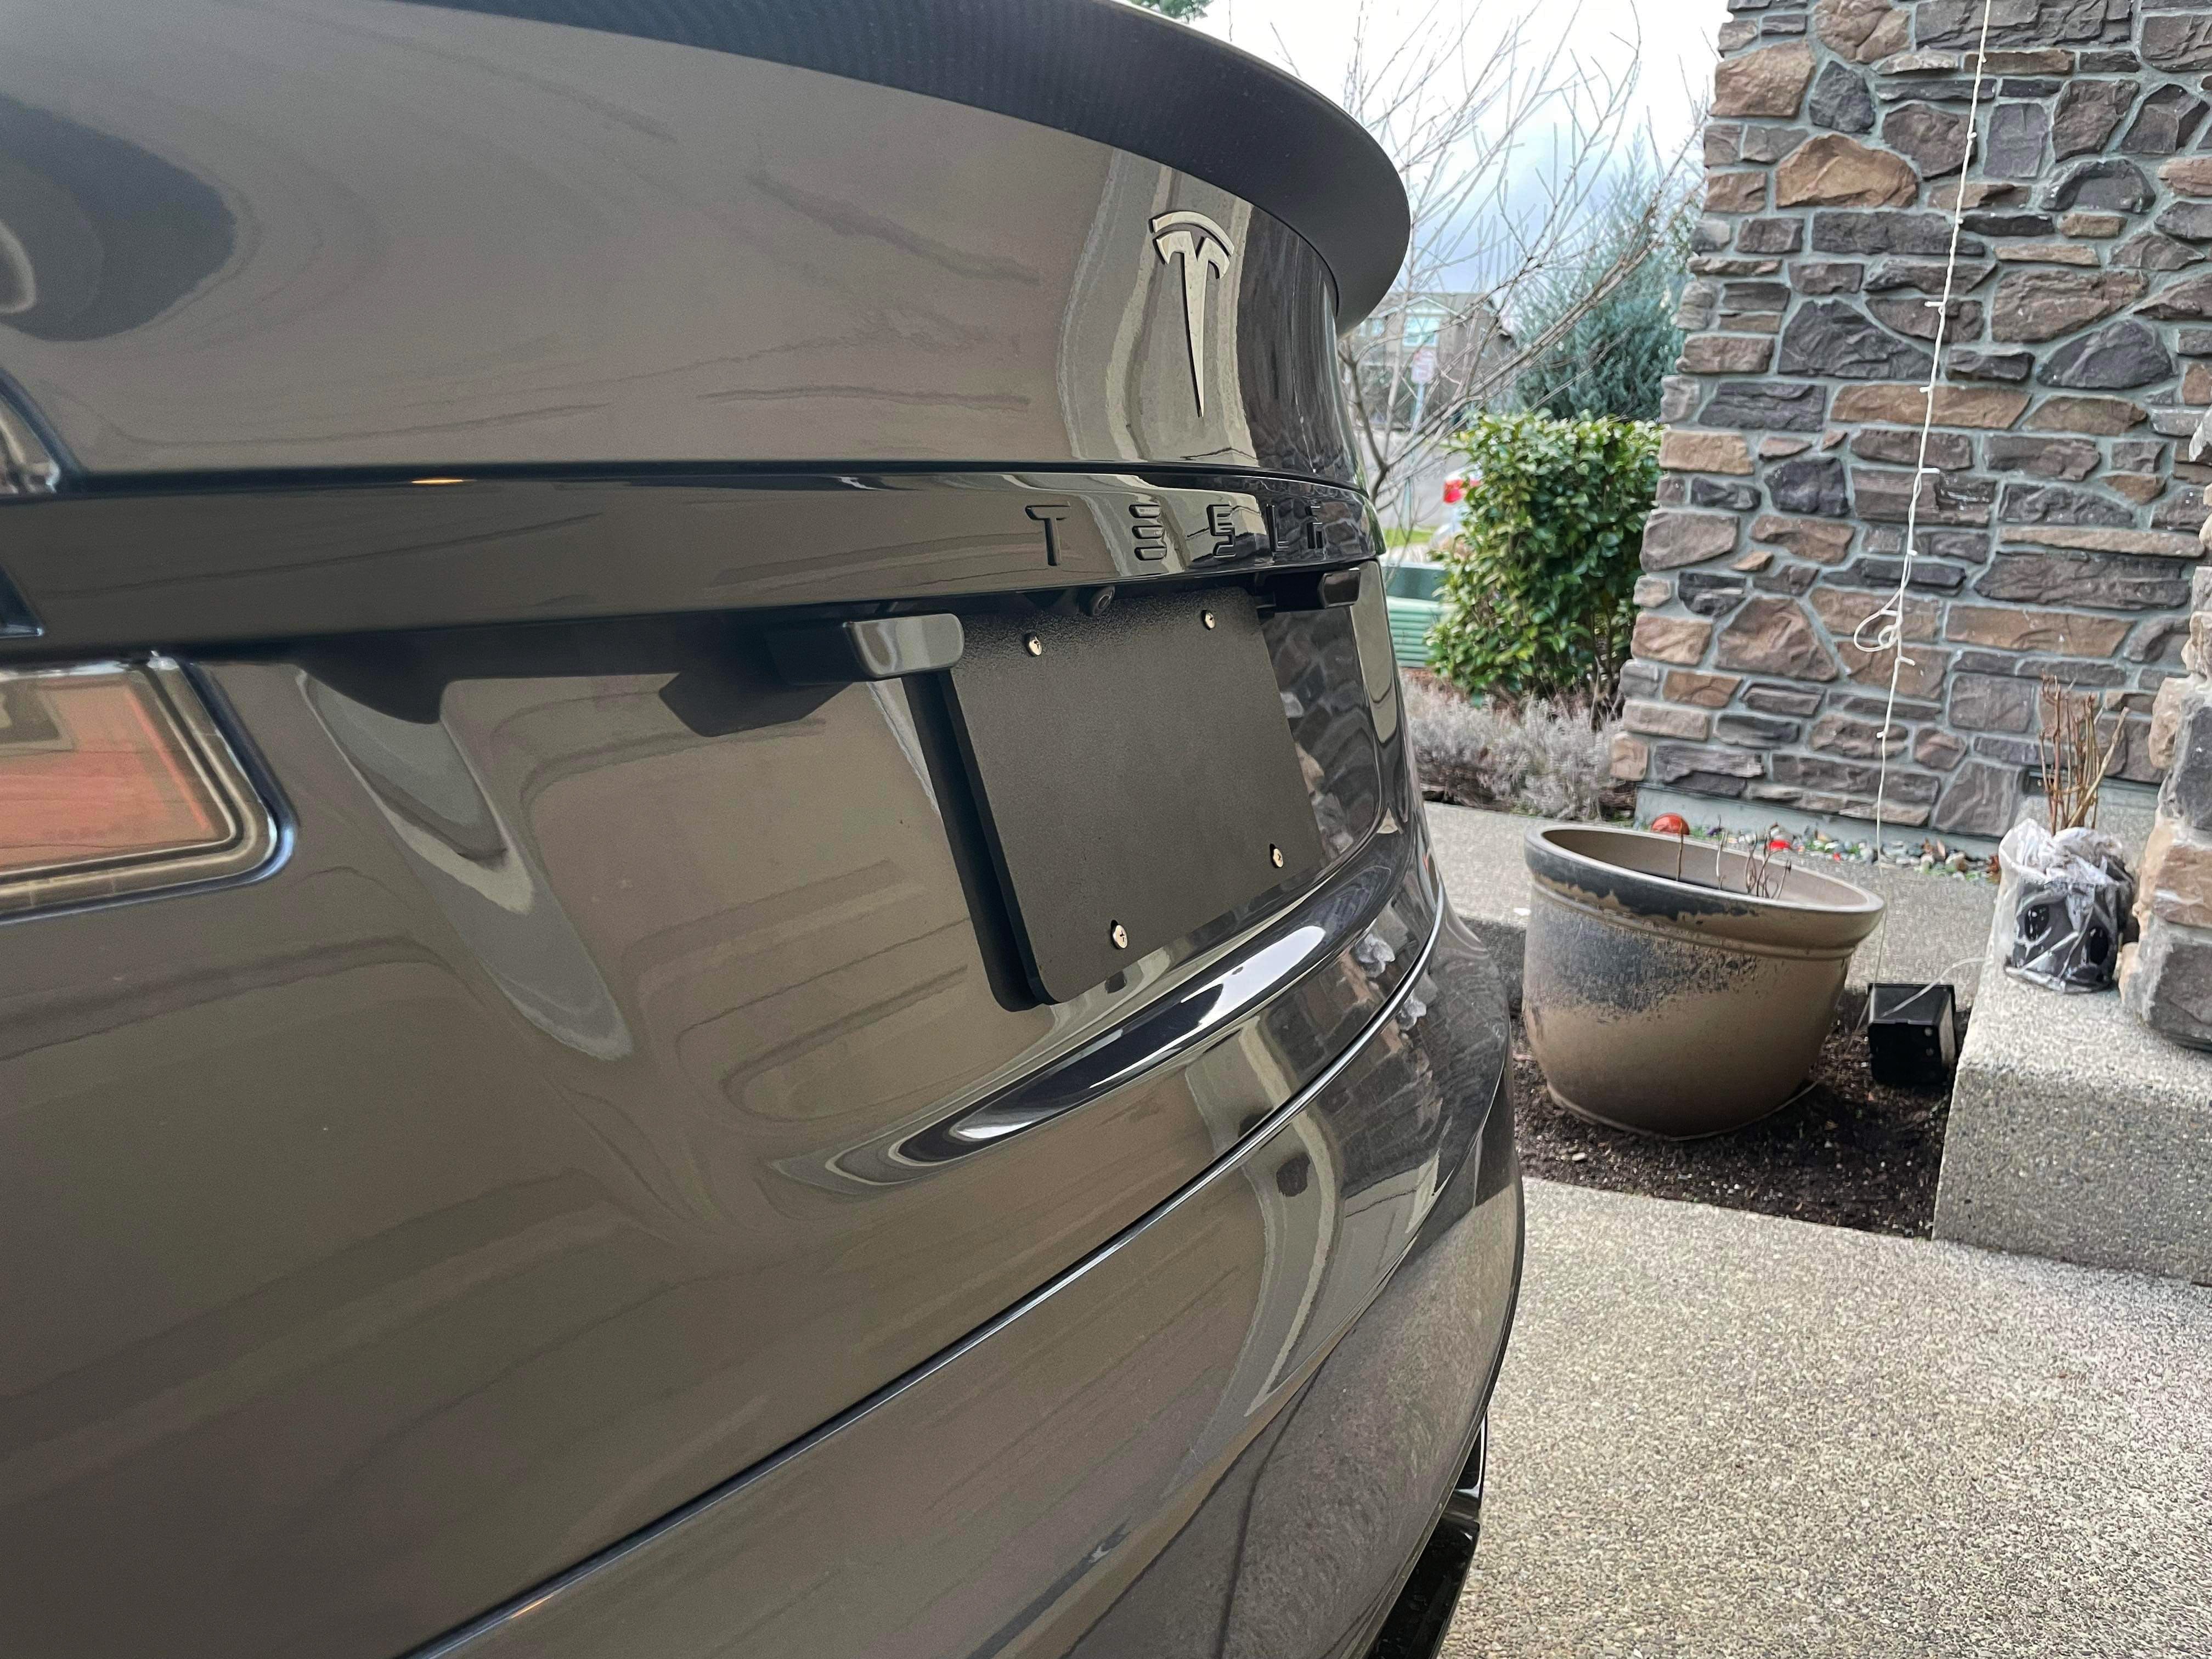 Tesla Model S Plaid with Radenso RC M Radar Detector Laser Jammer Hidden Installation installed by Systems Unlimited